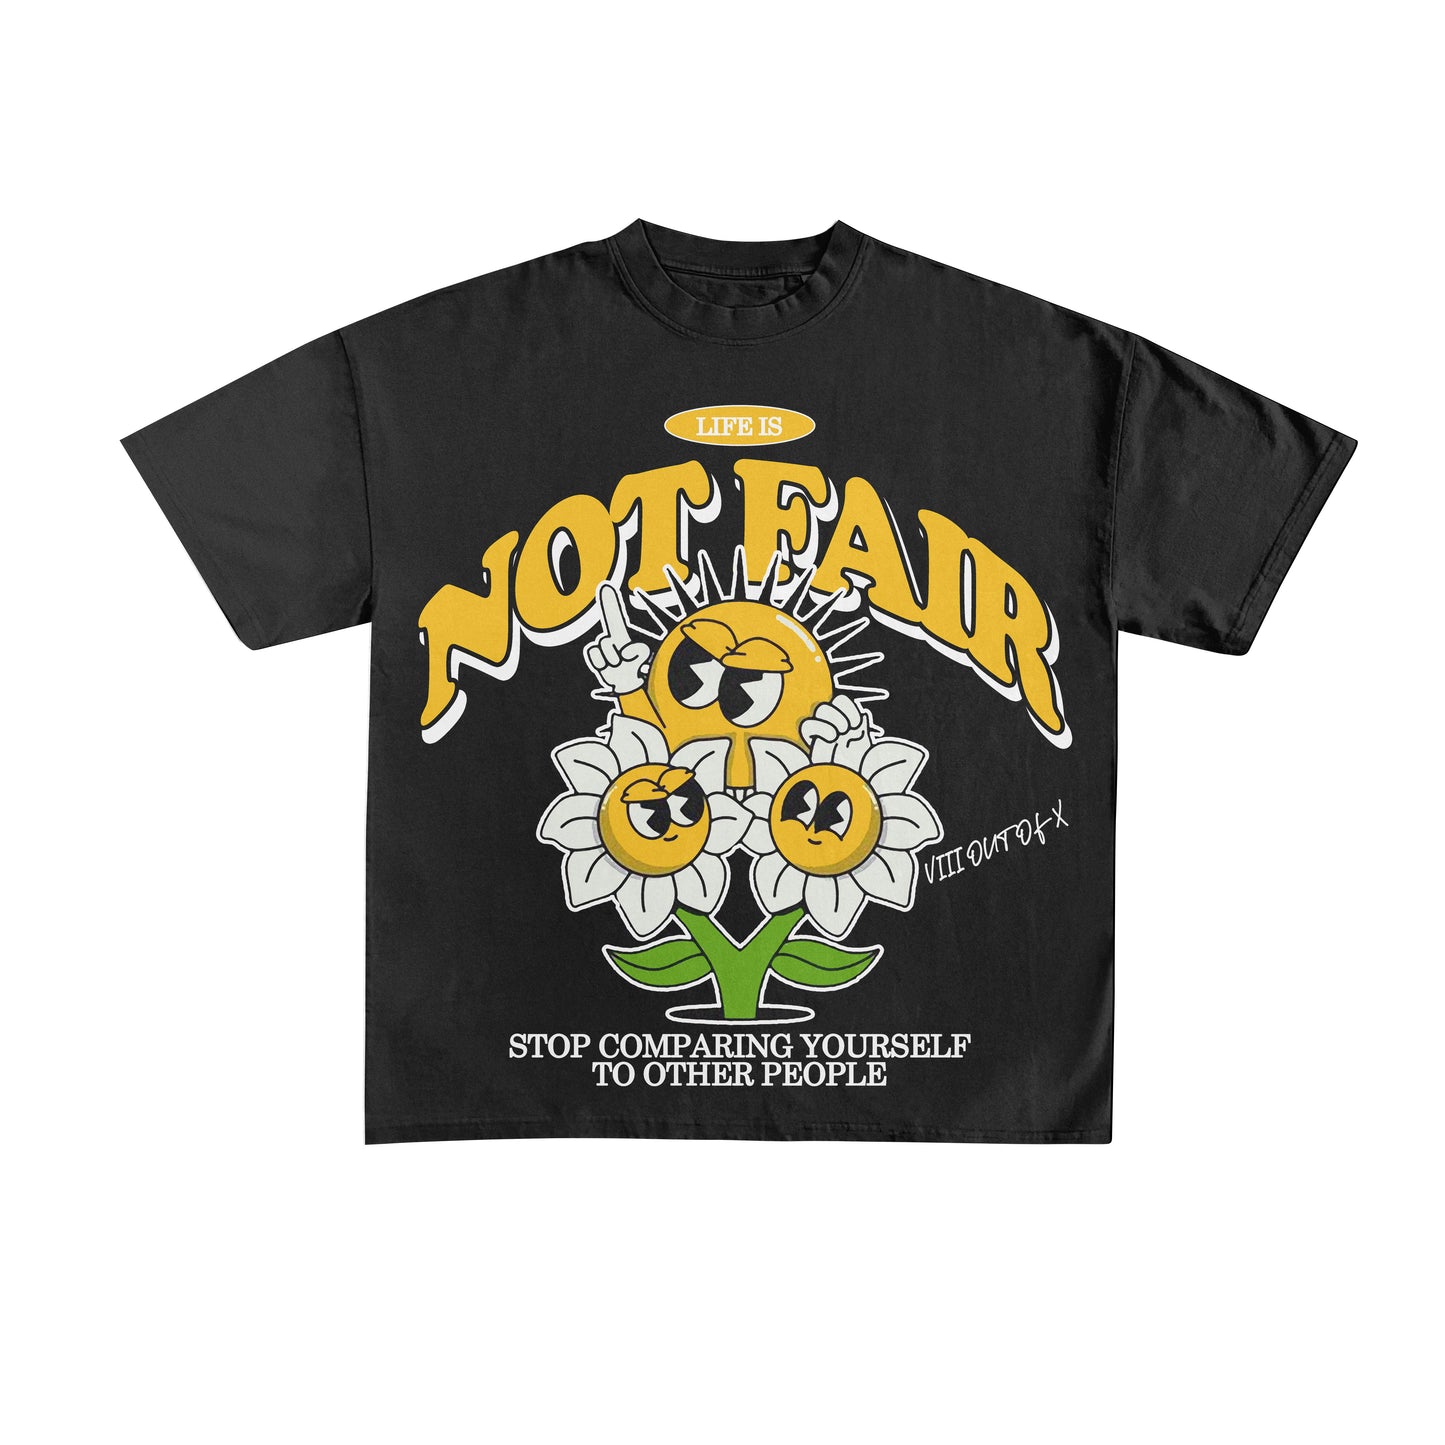 *PRE-ORDER* VIII Out Of X "Life Is Not Fair" T-Shirt (Black)